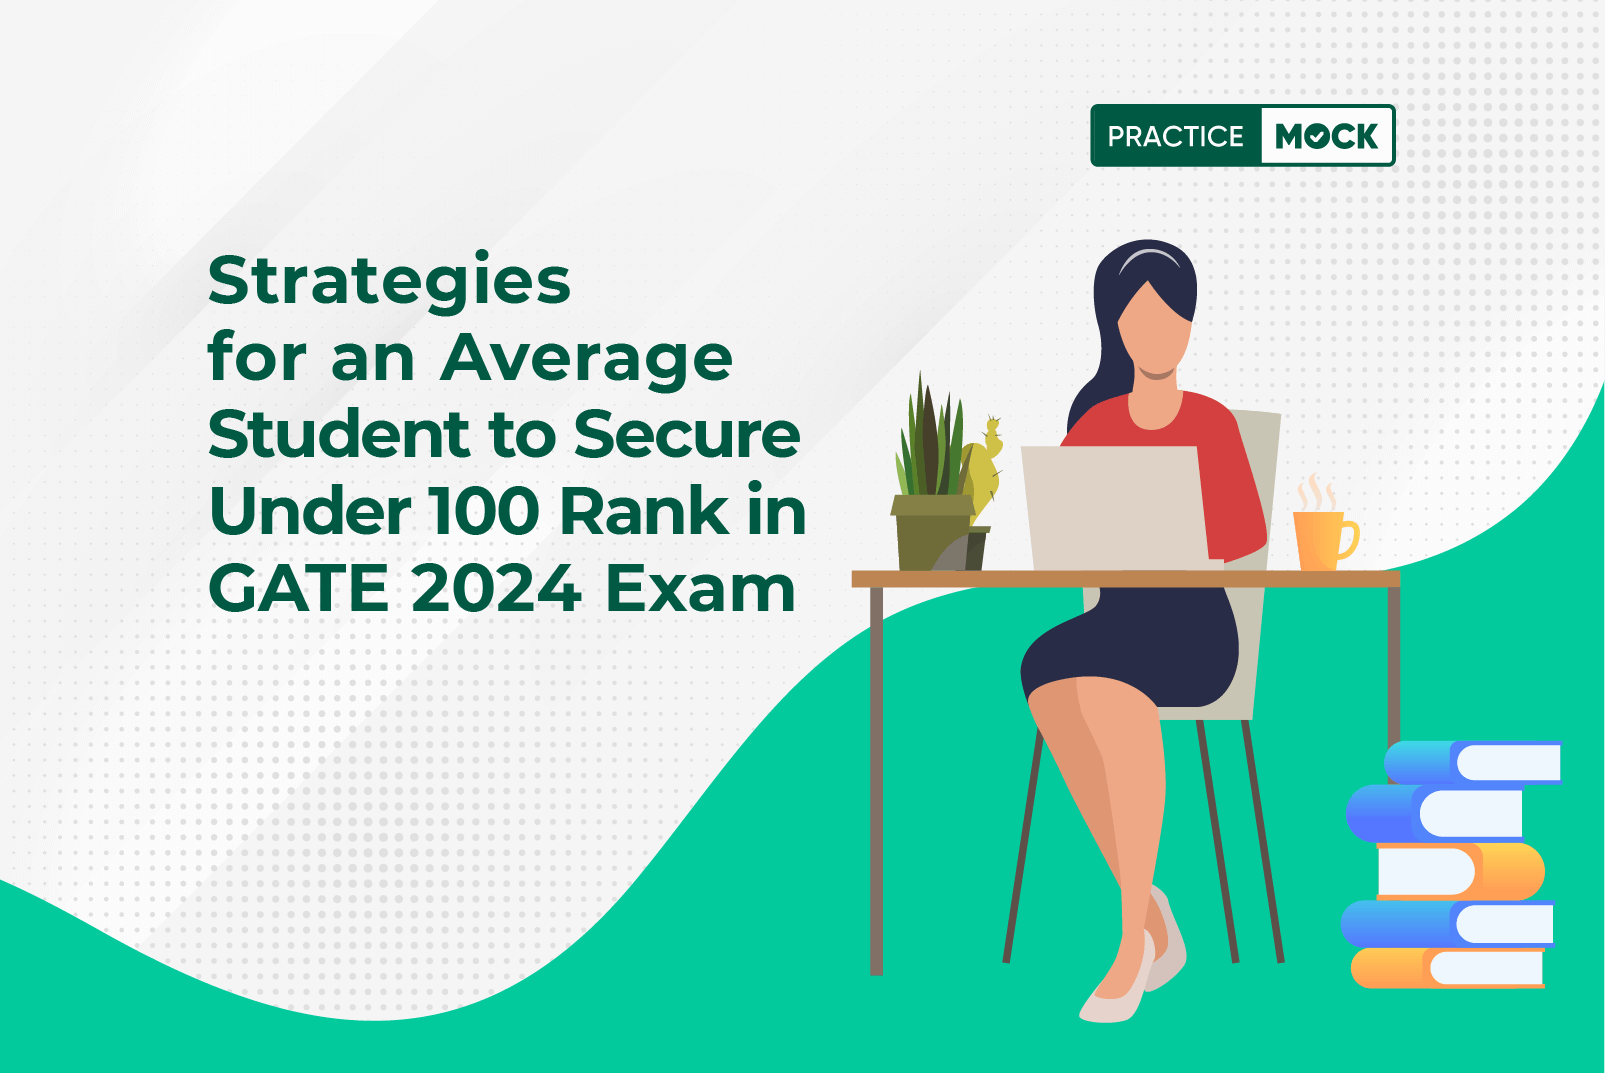 Can an Average Student Secure Under 100 Rank in GATE Exam?